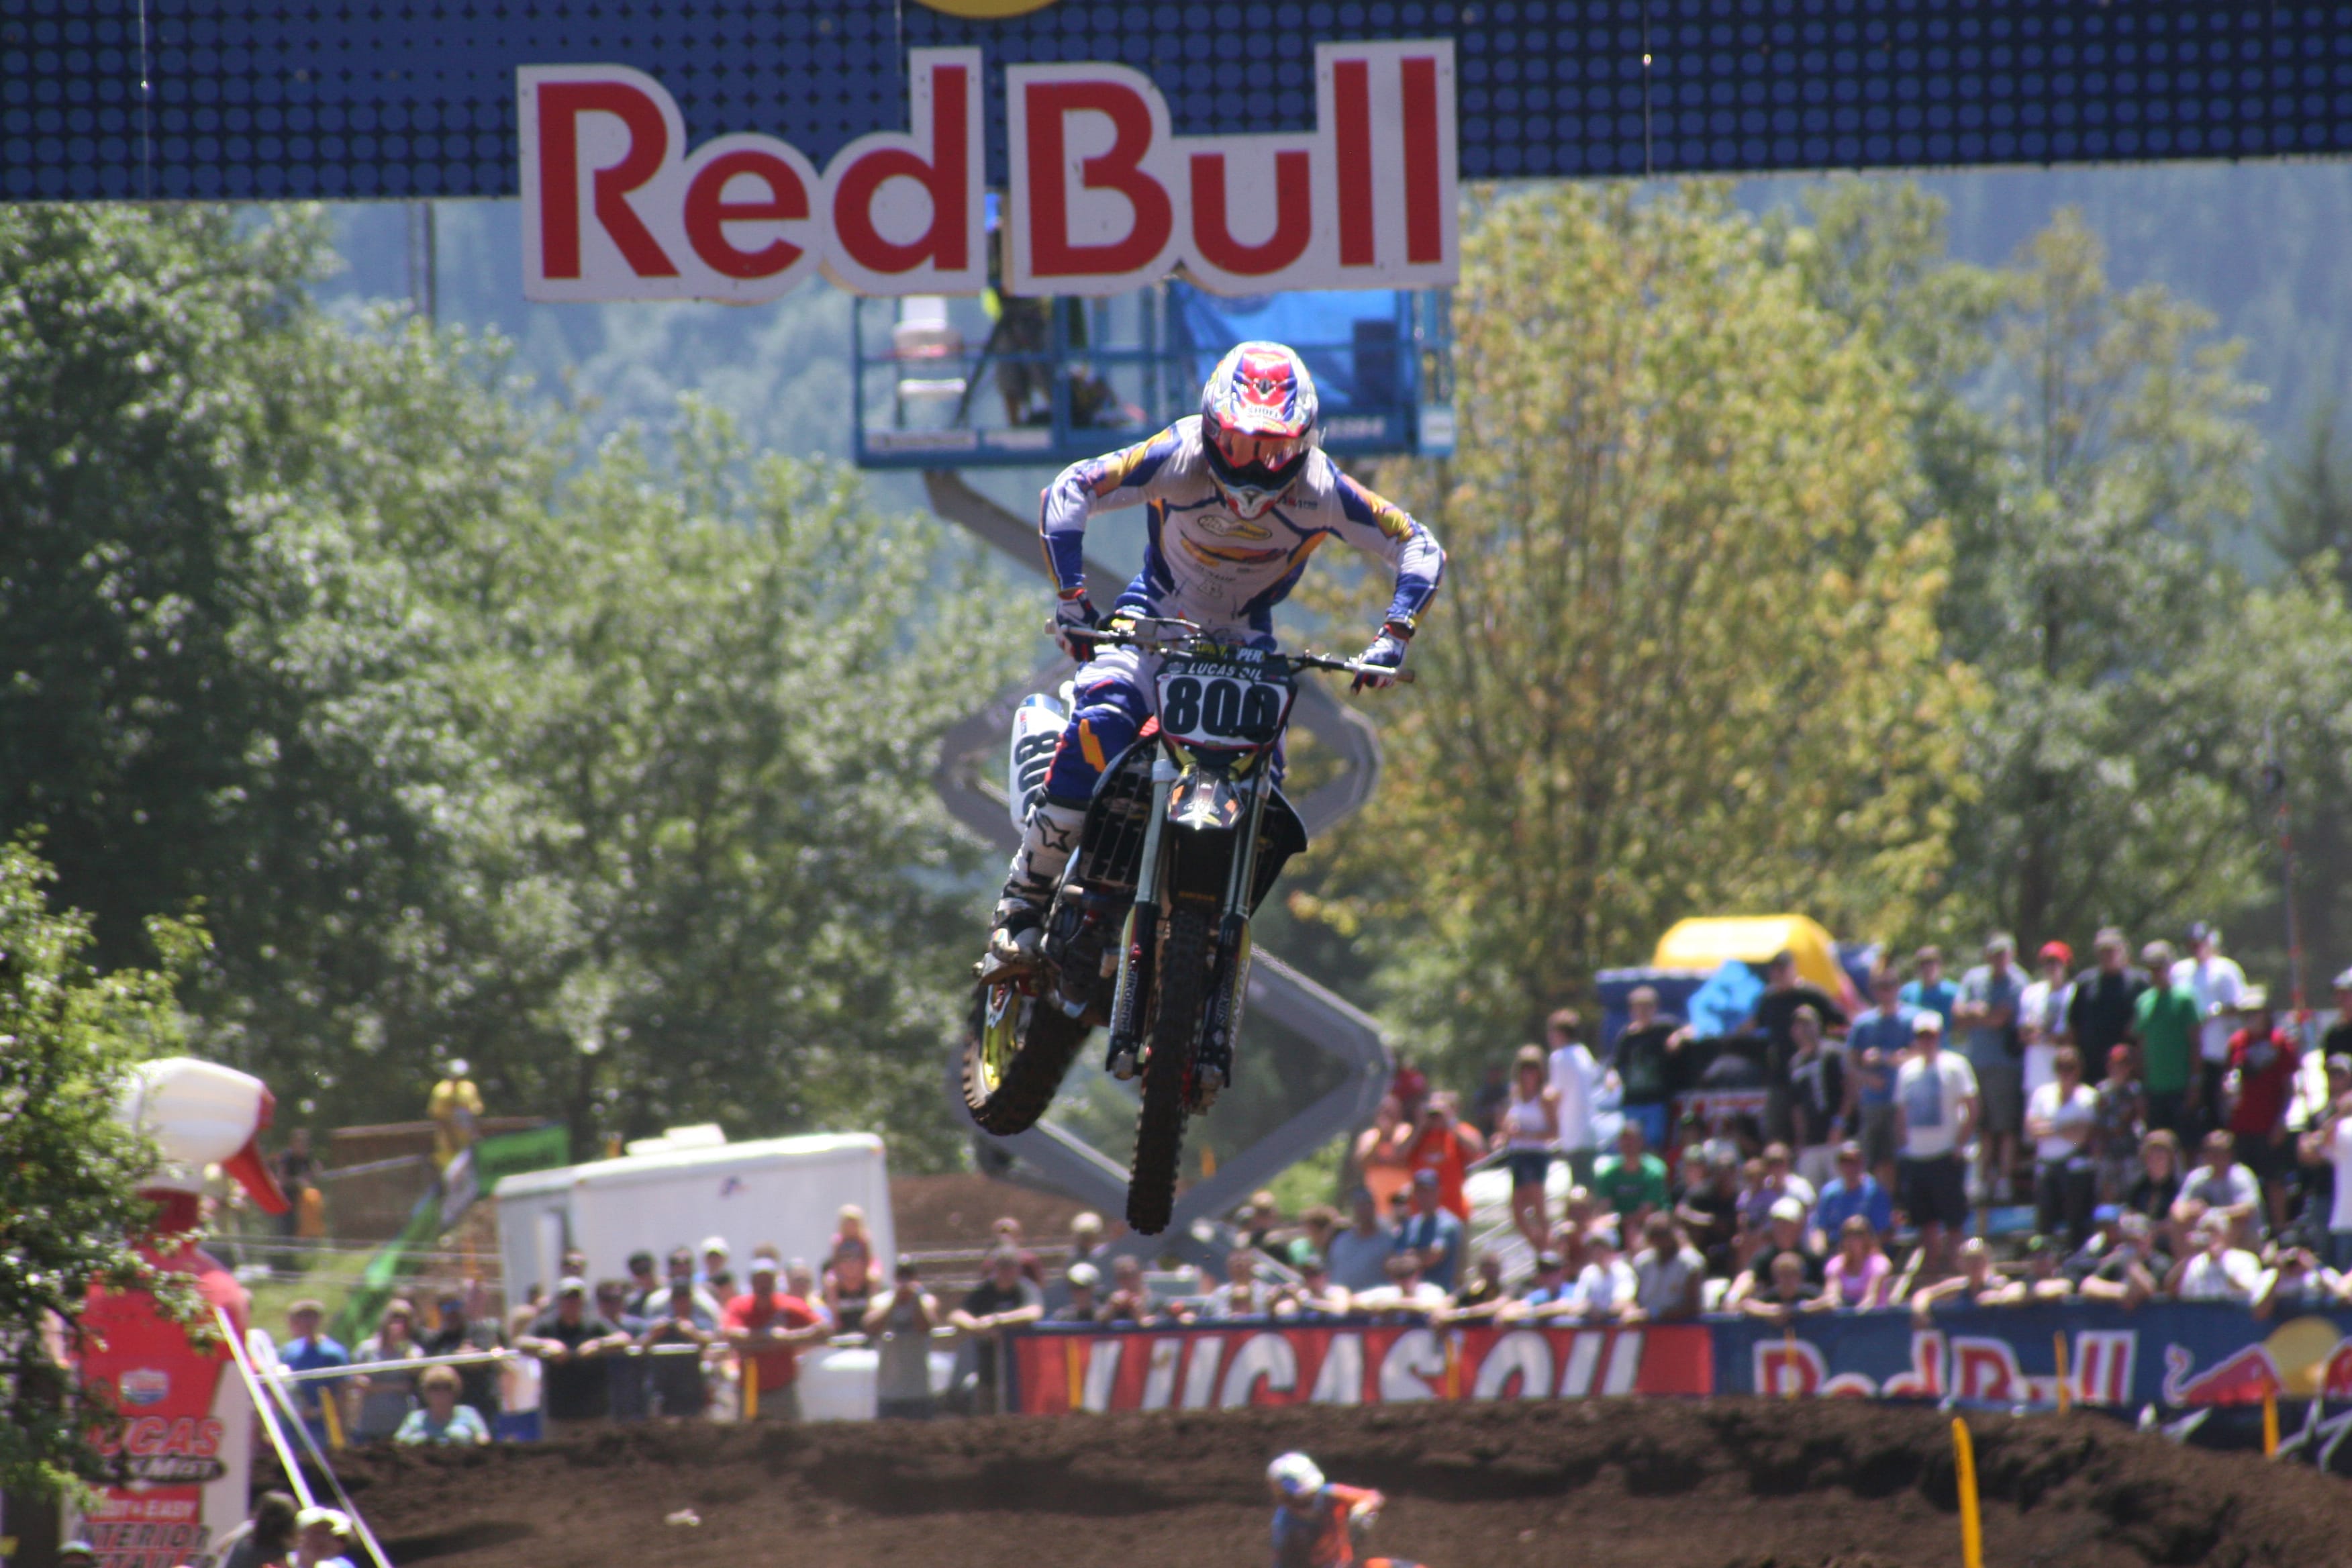 Post-Record file photos
Pro National events get underway on Saturday at the Washougal Motocross Park.